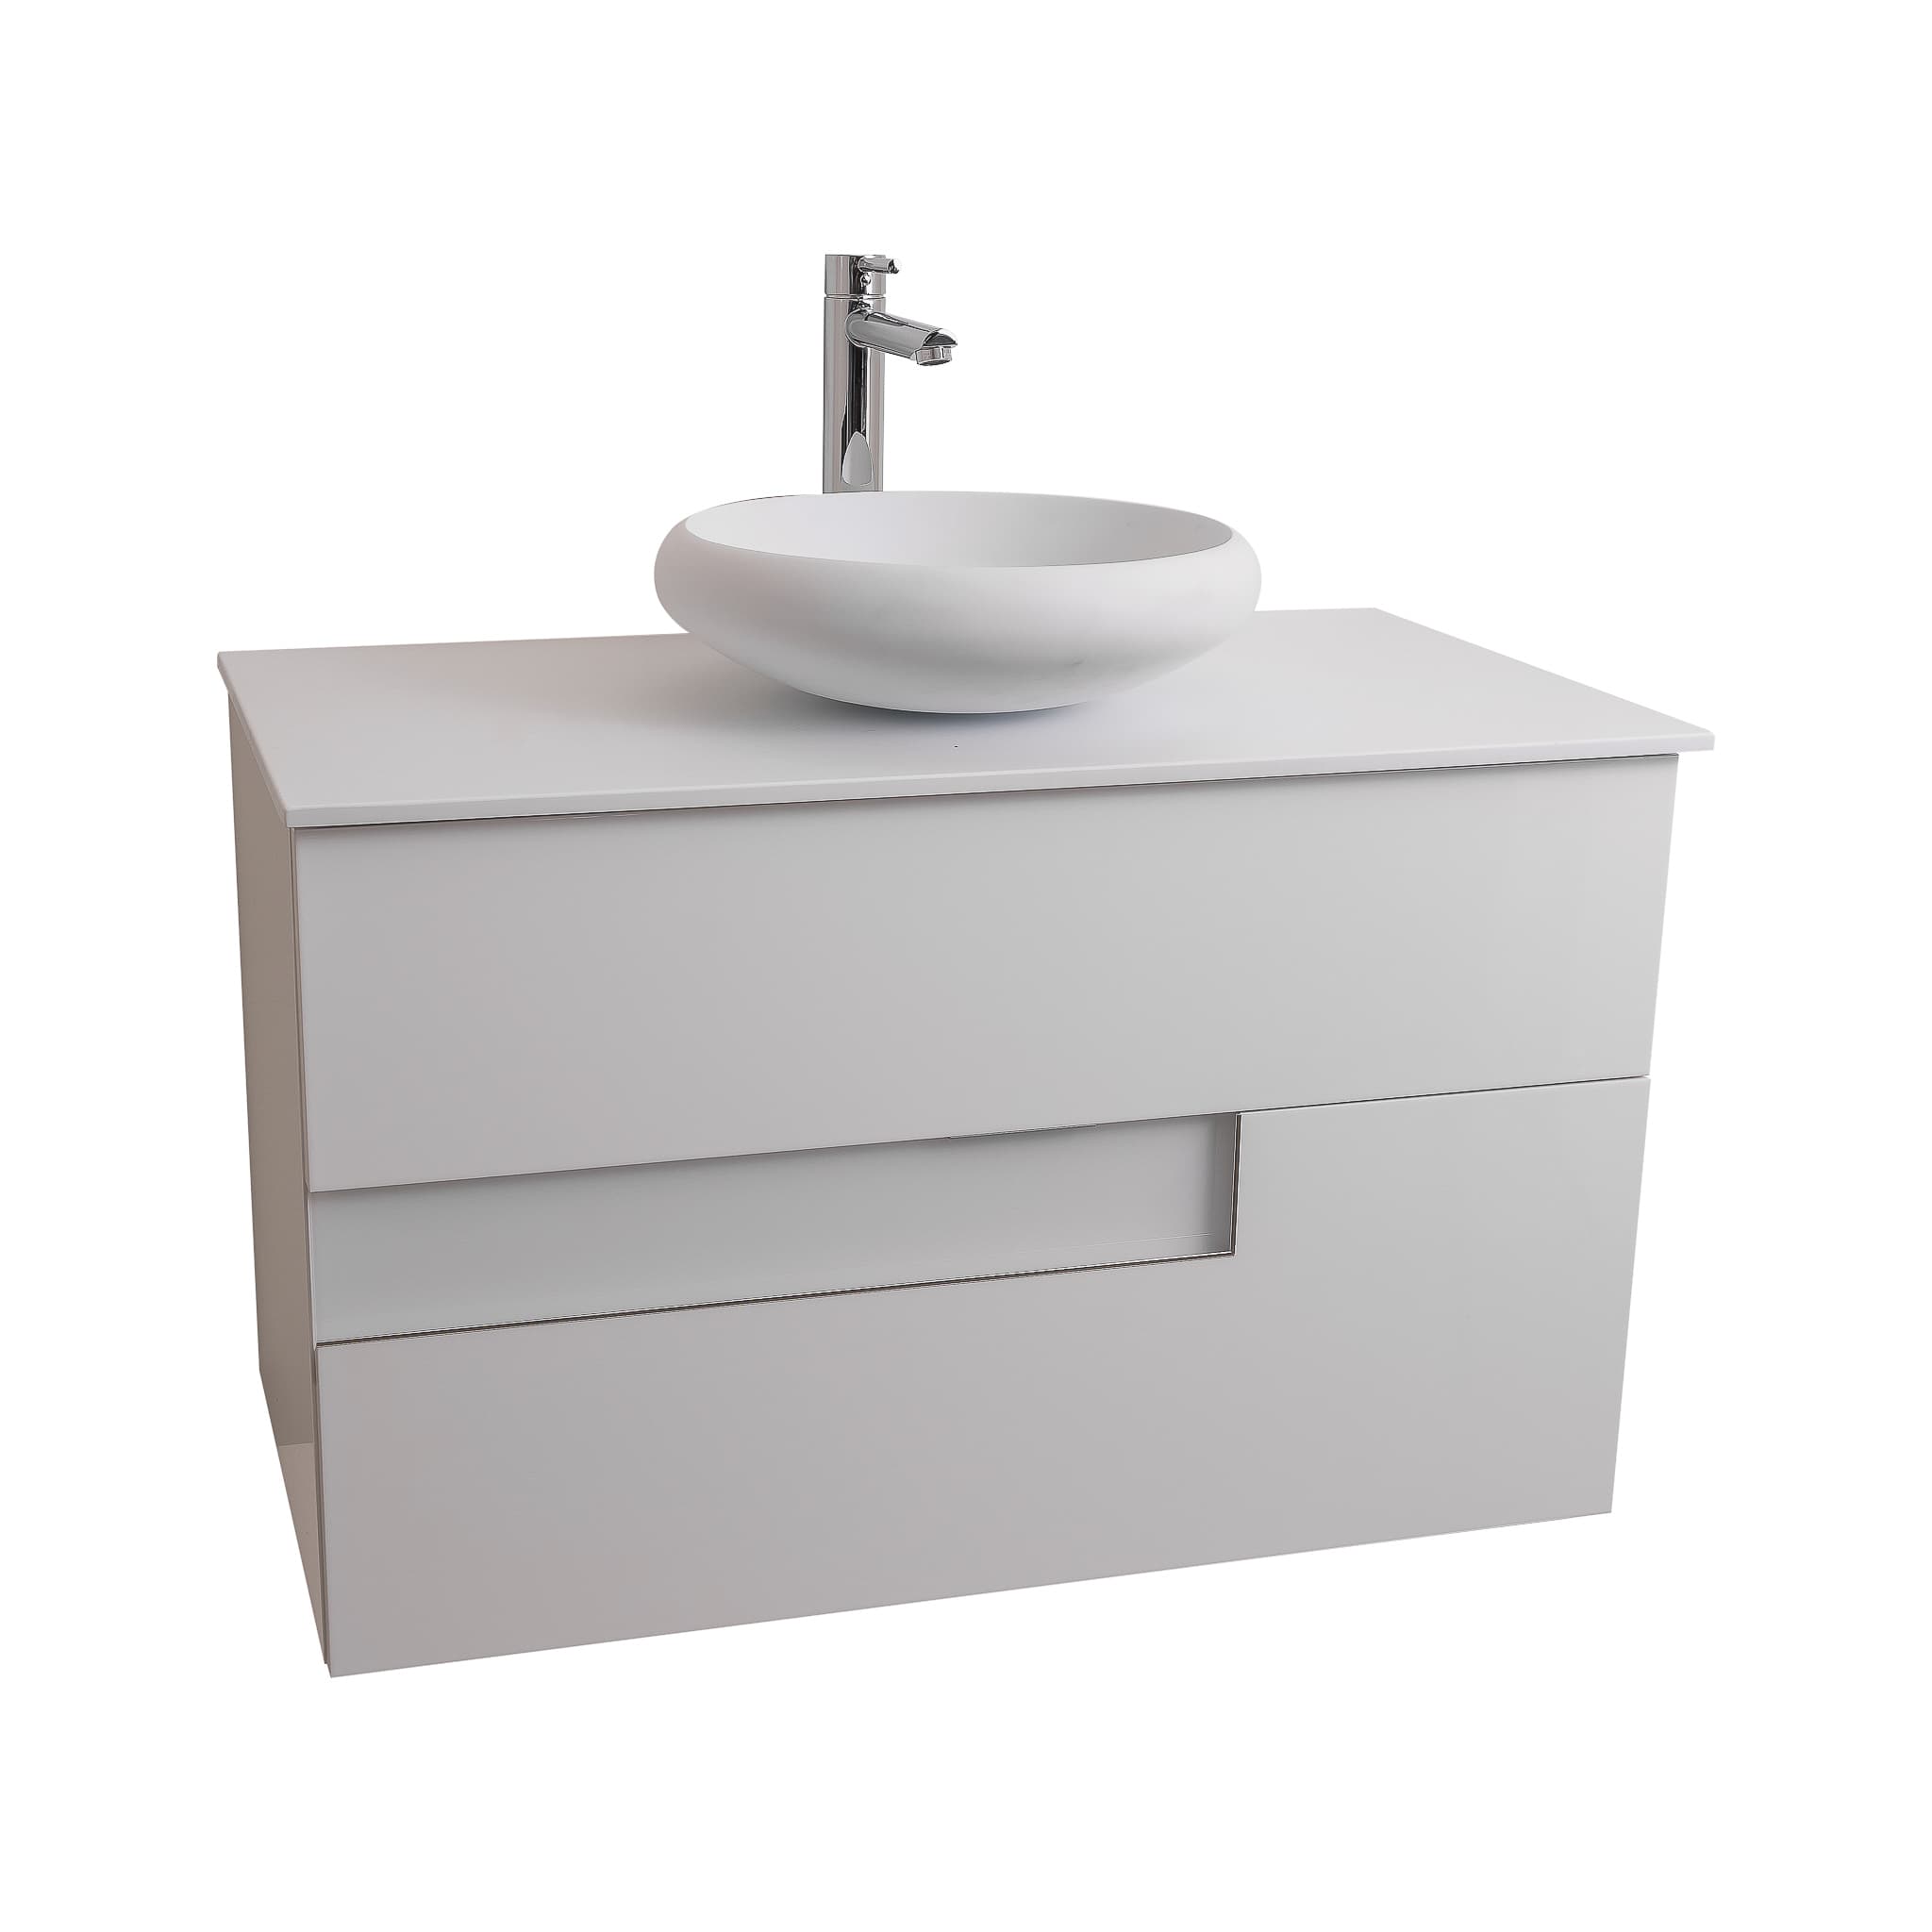 Vision 35.5 White High Gloss Cabinet, Solid Surface Flat White Counter And Round Solid Surface White Basin 1153, Wall Mounted Modern Vanity Set